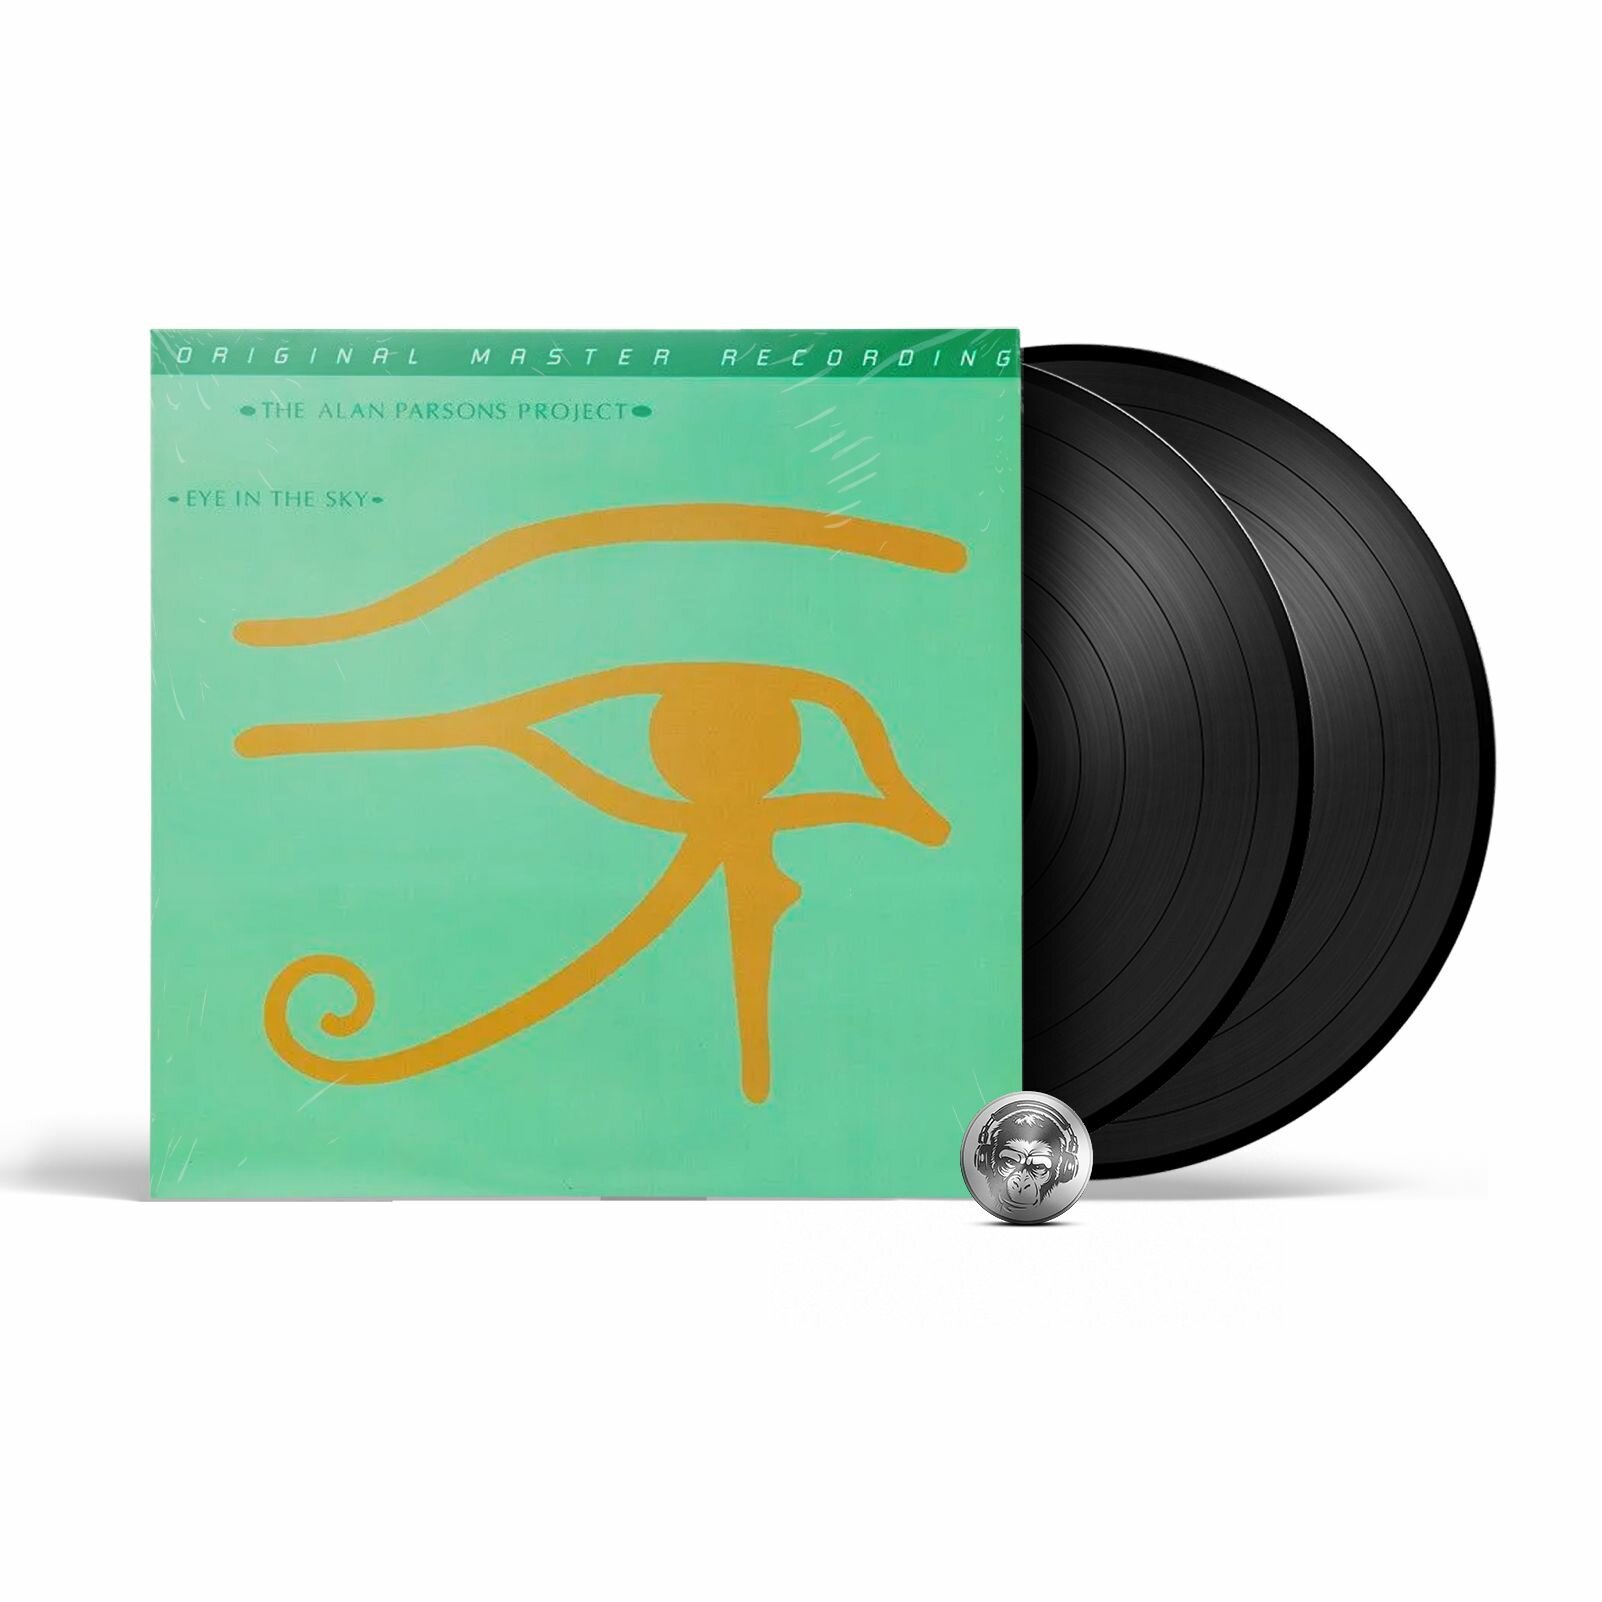 The Alan Parsons Project - Eye In The Sky (Original Master Recording) (2LP), 2022, Limited Edition, Виниловая пластинка